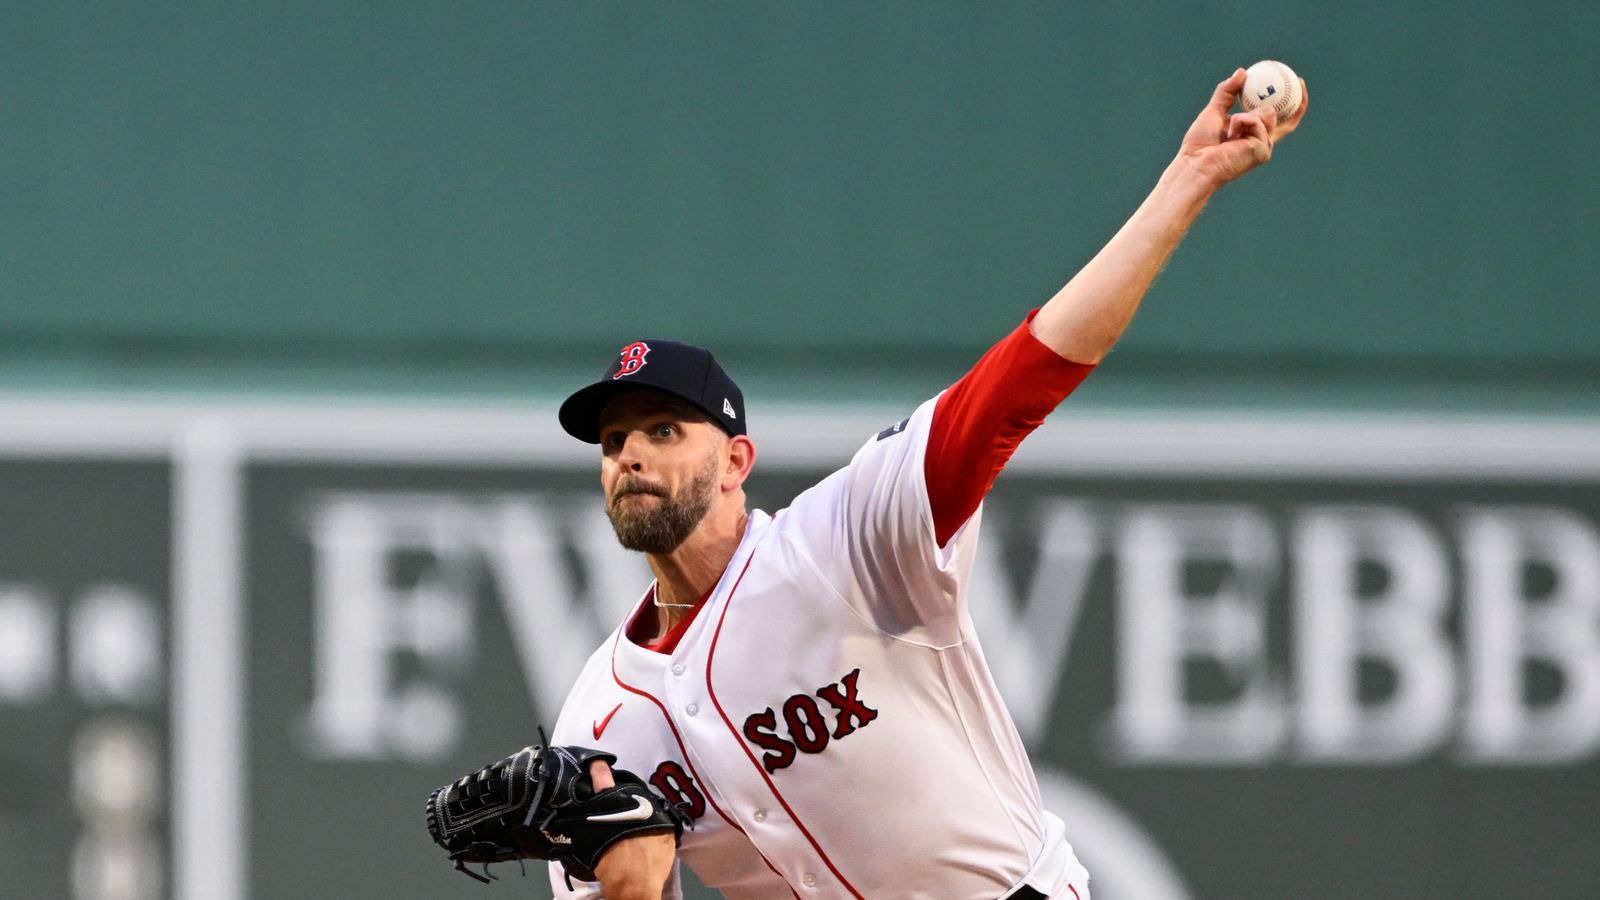 MLB Notes: The Red Sox need starting pitching, and there will be